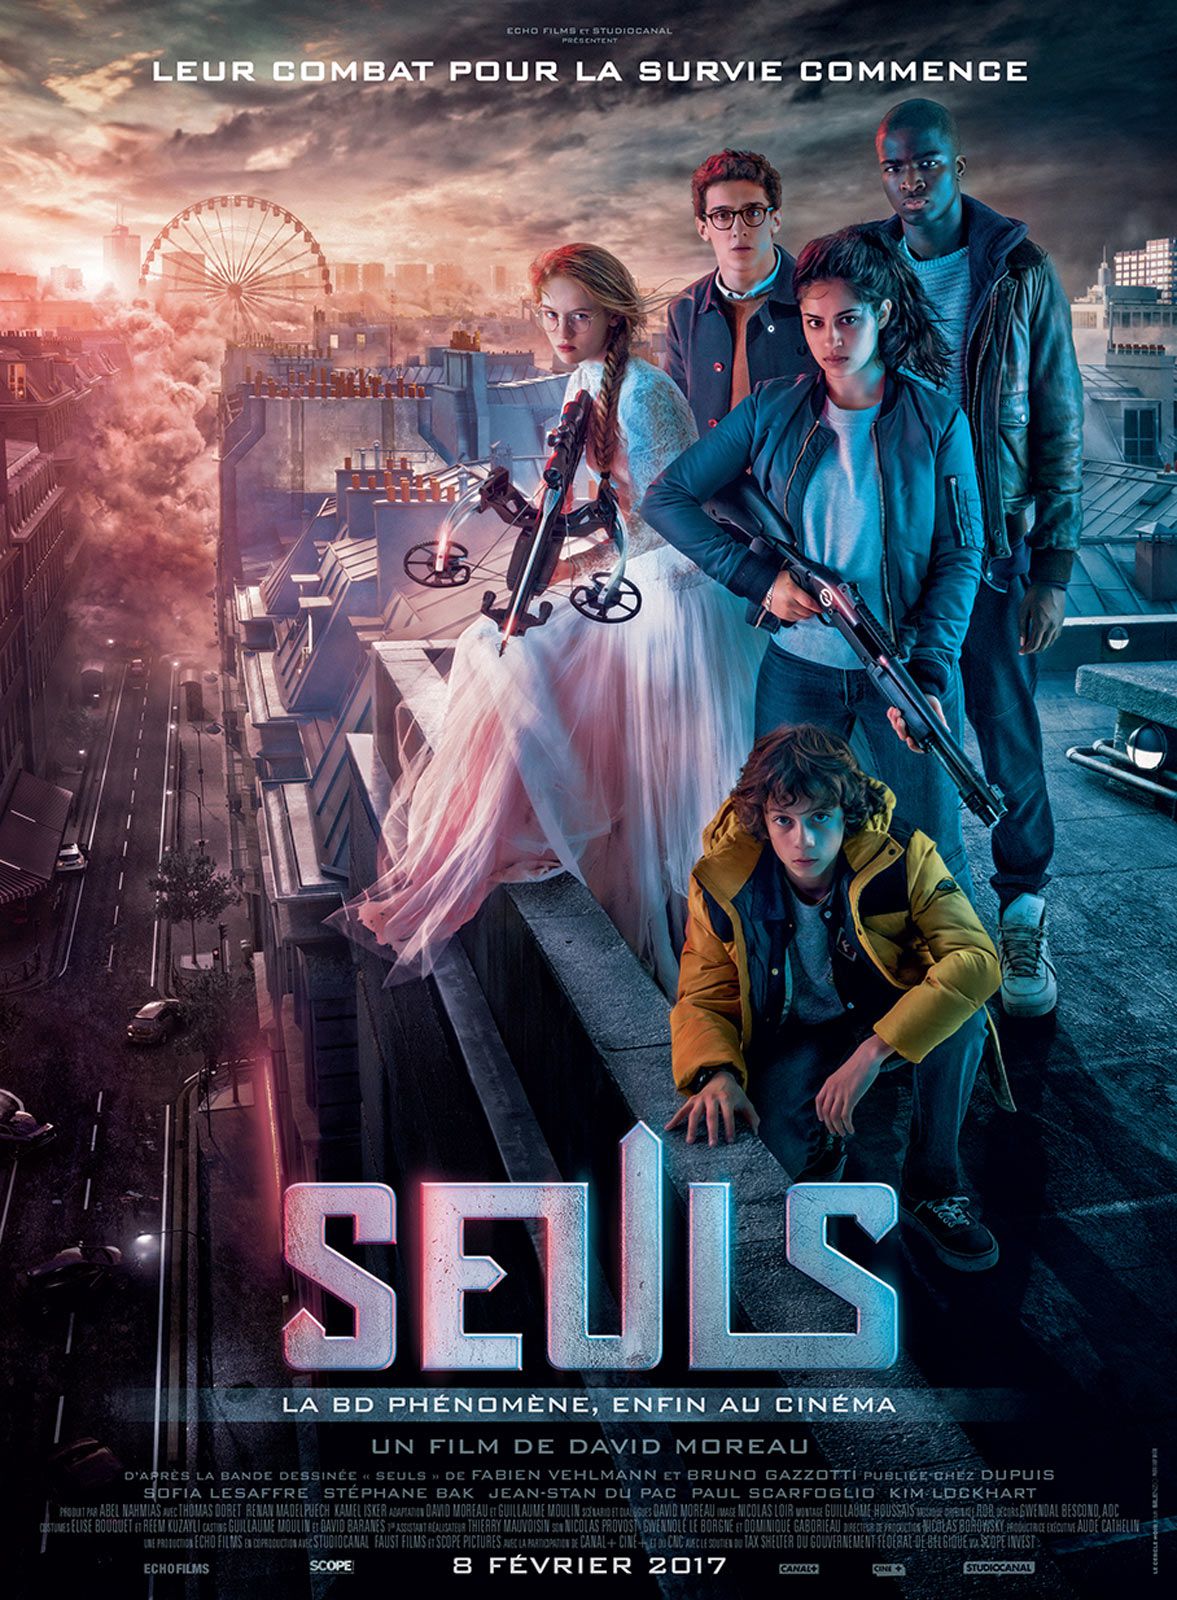 Seuls - Film (2017) streaming VF gratuit complet